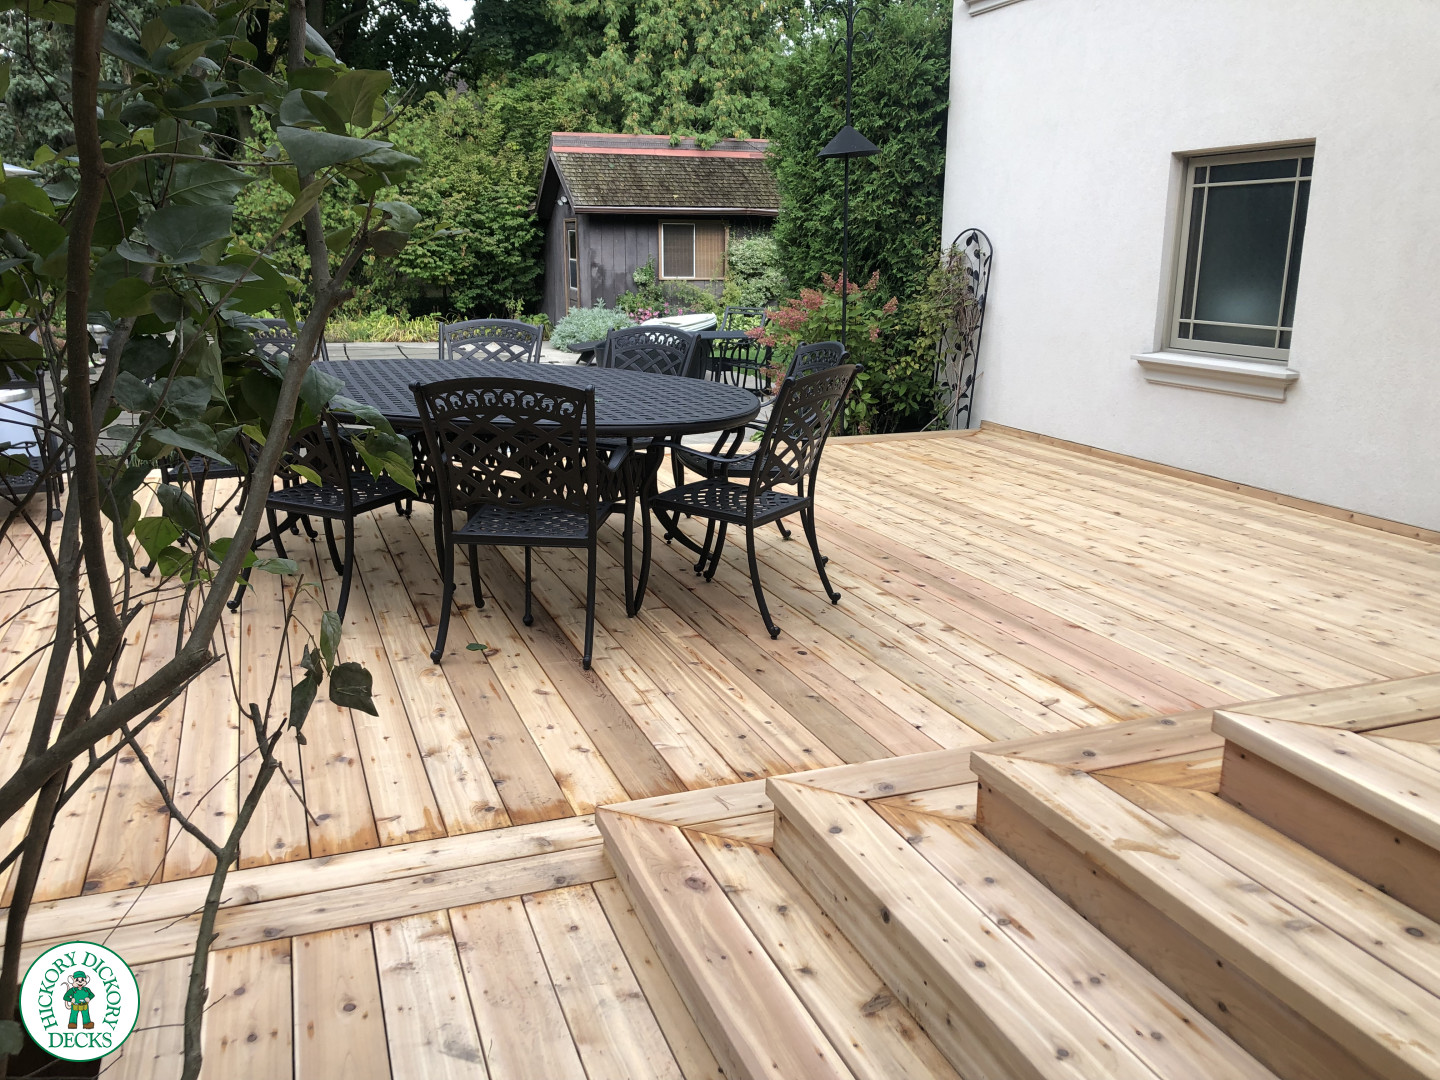 Deck Picture 4